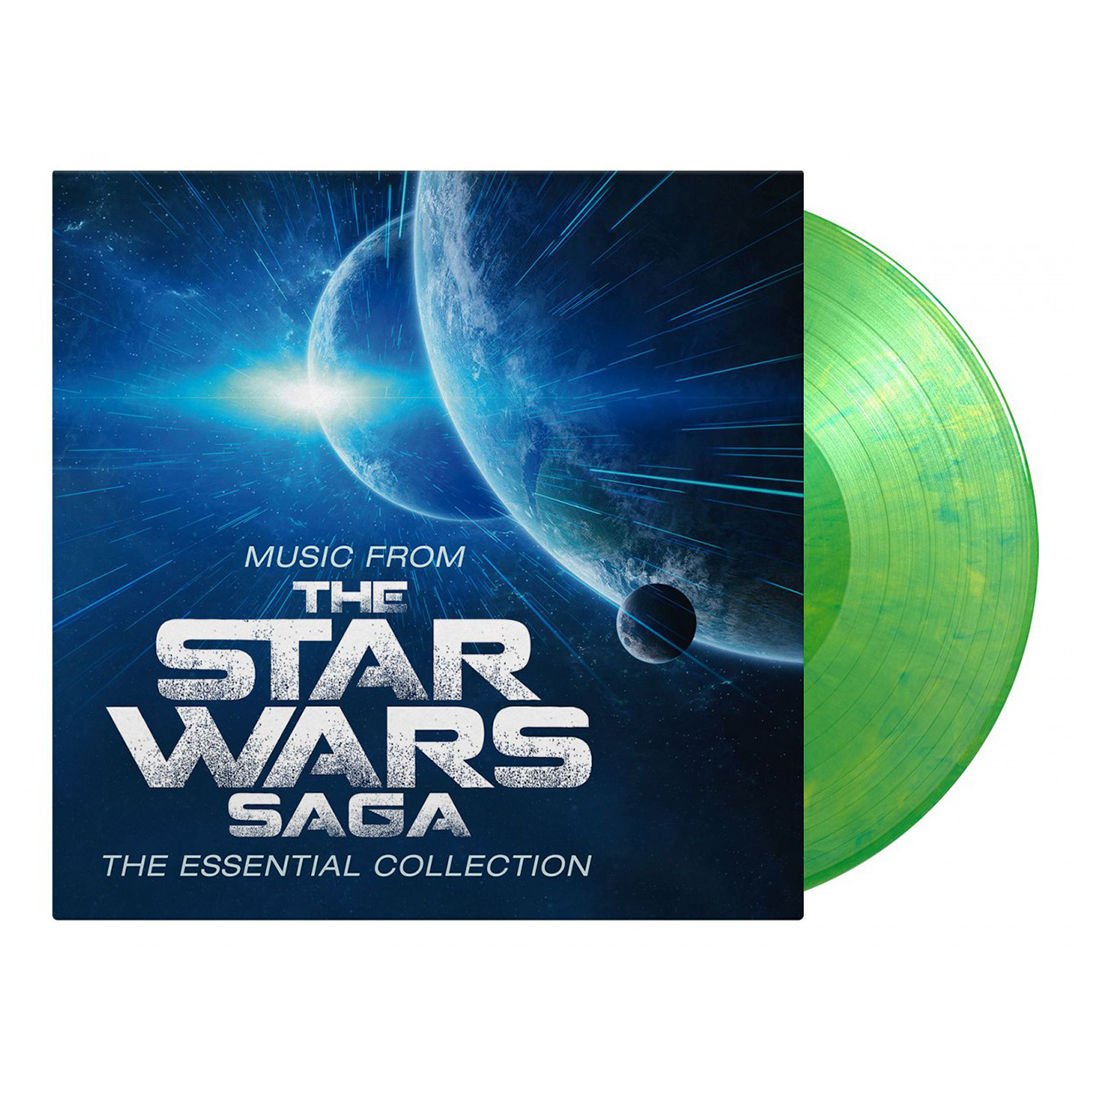 Music From The Star Wars Saga (OST) - The Essential Collection: Limited Edition Yoda-Green Marbled Vinyl LP